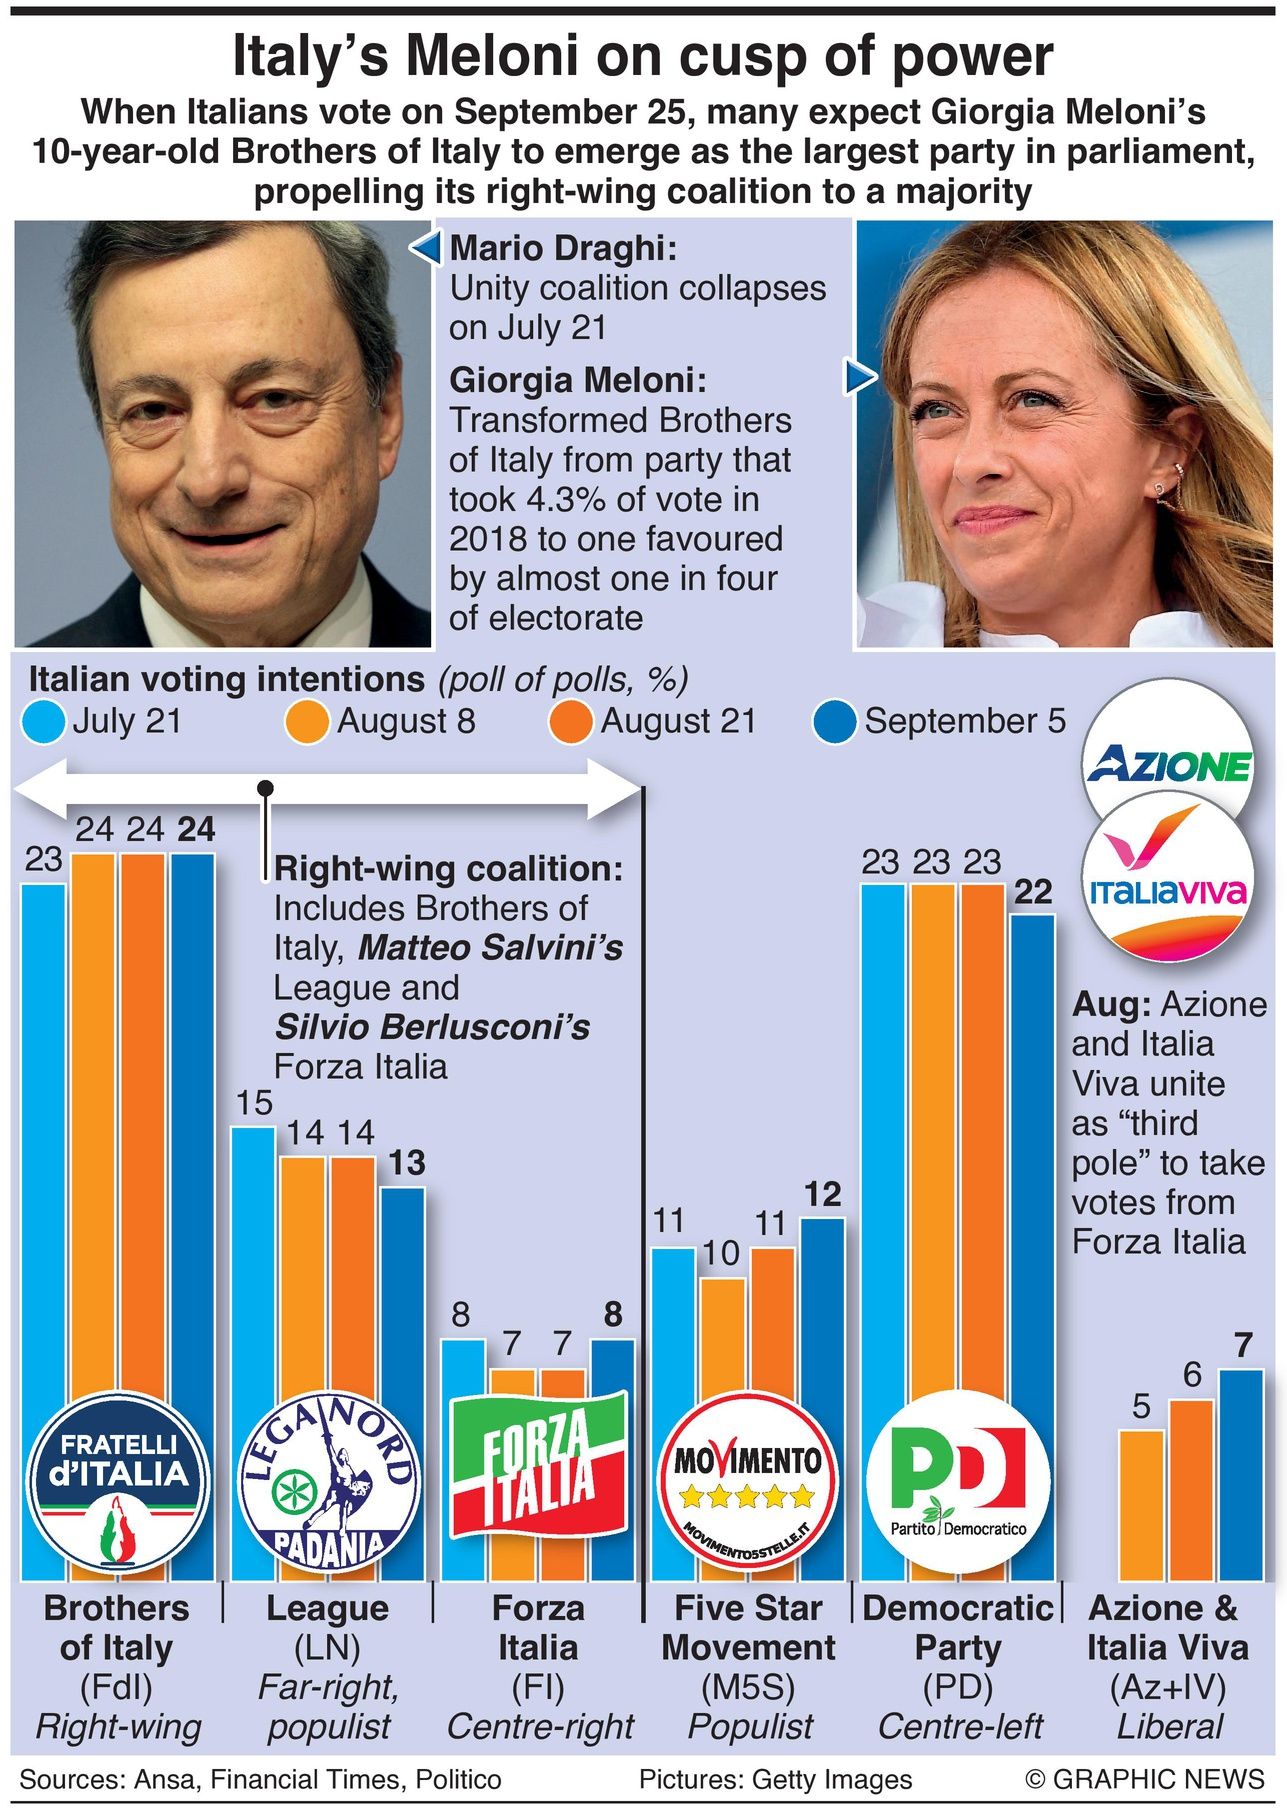 Infographic depicting Italy's Giorgia Meloni, head of the Brothers of Italy party and chance of winning upcoming election